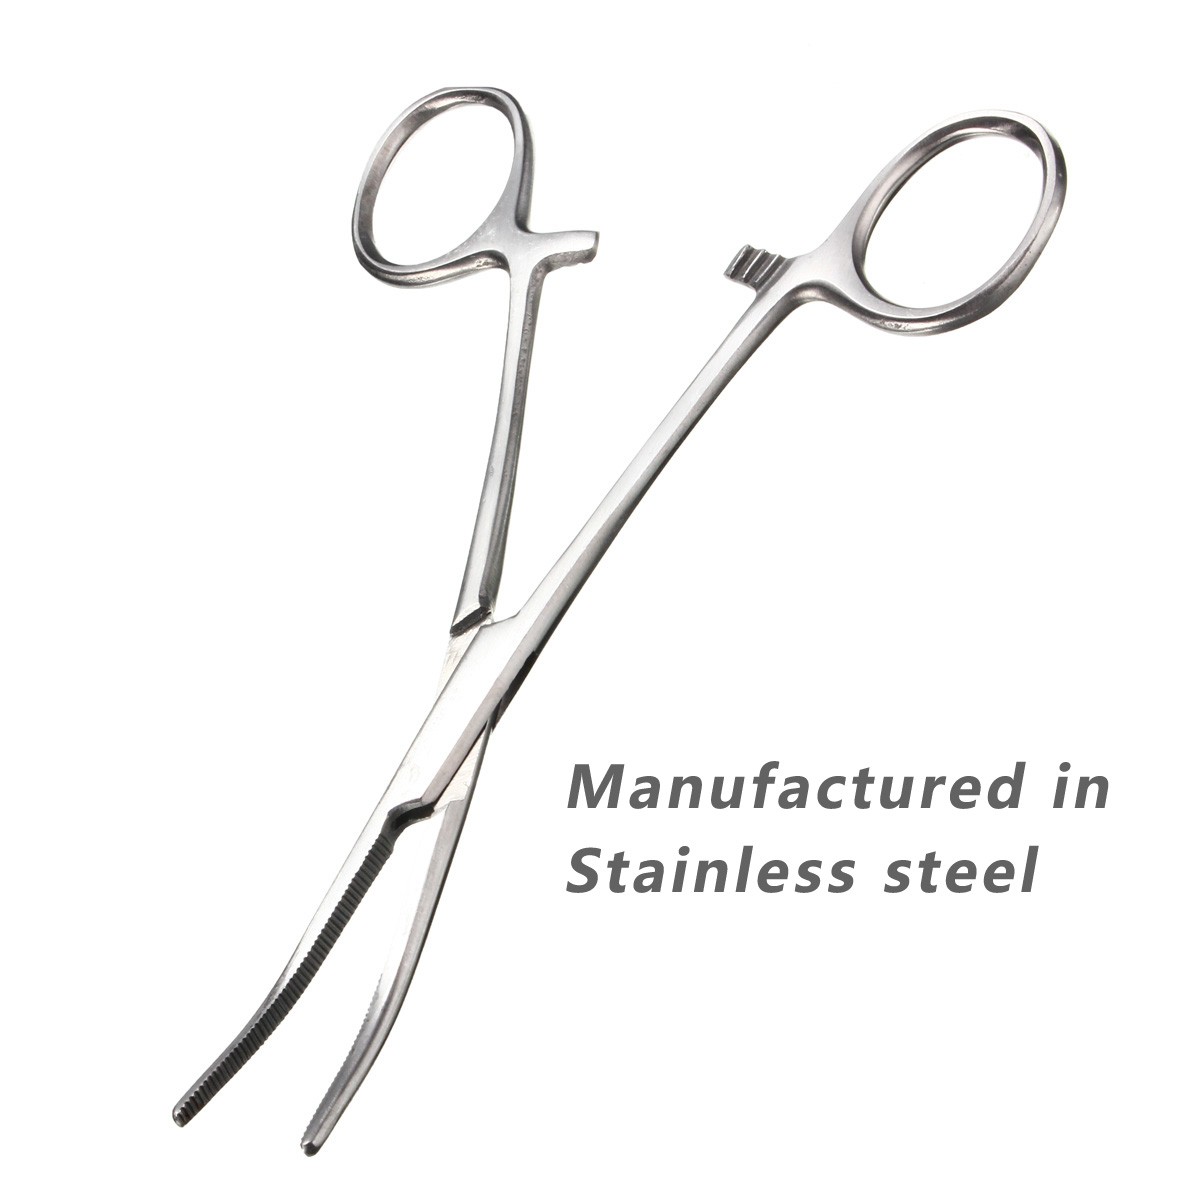 Hemostat-Forceps-Straight-Curved-Stainless-Steel-Locking-Clamp-1039903-7